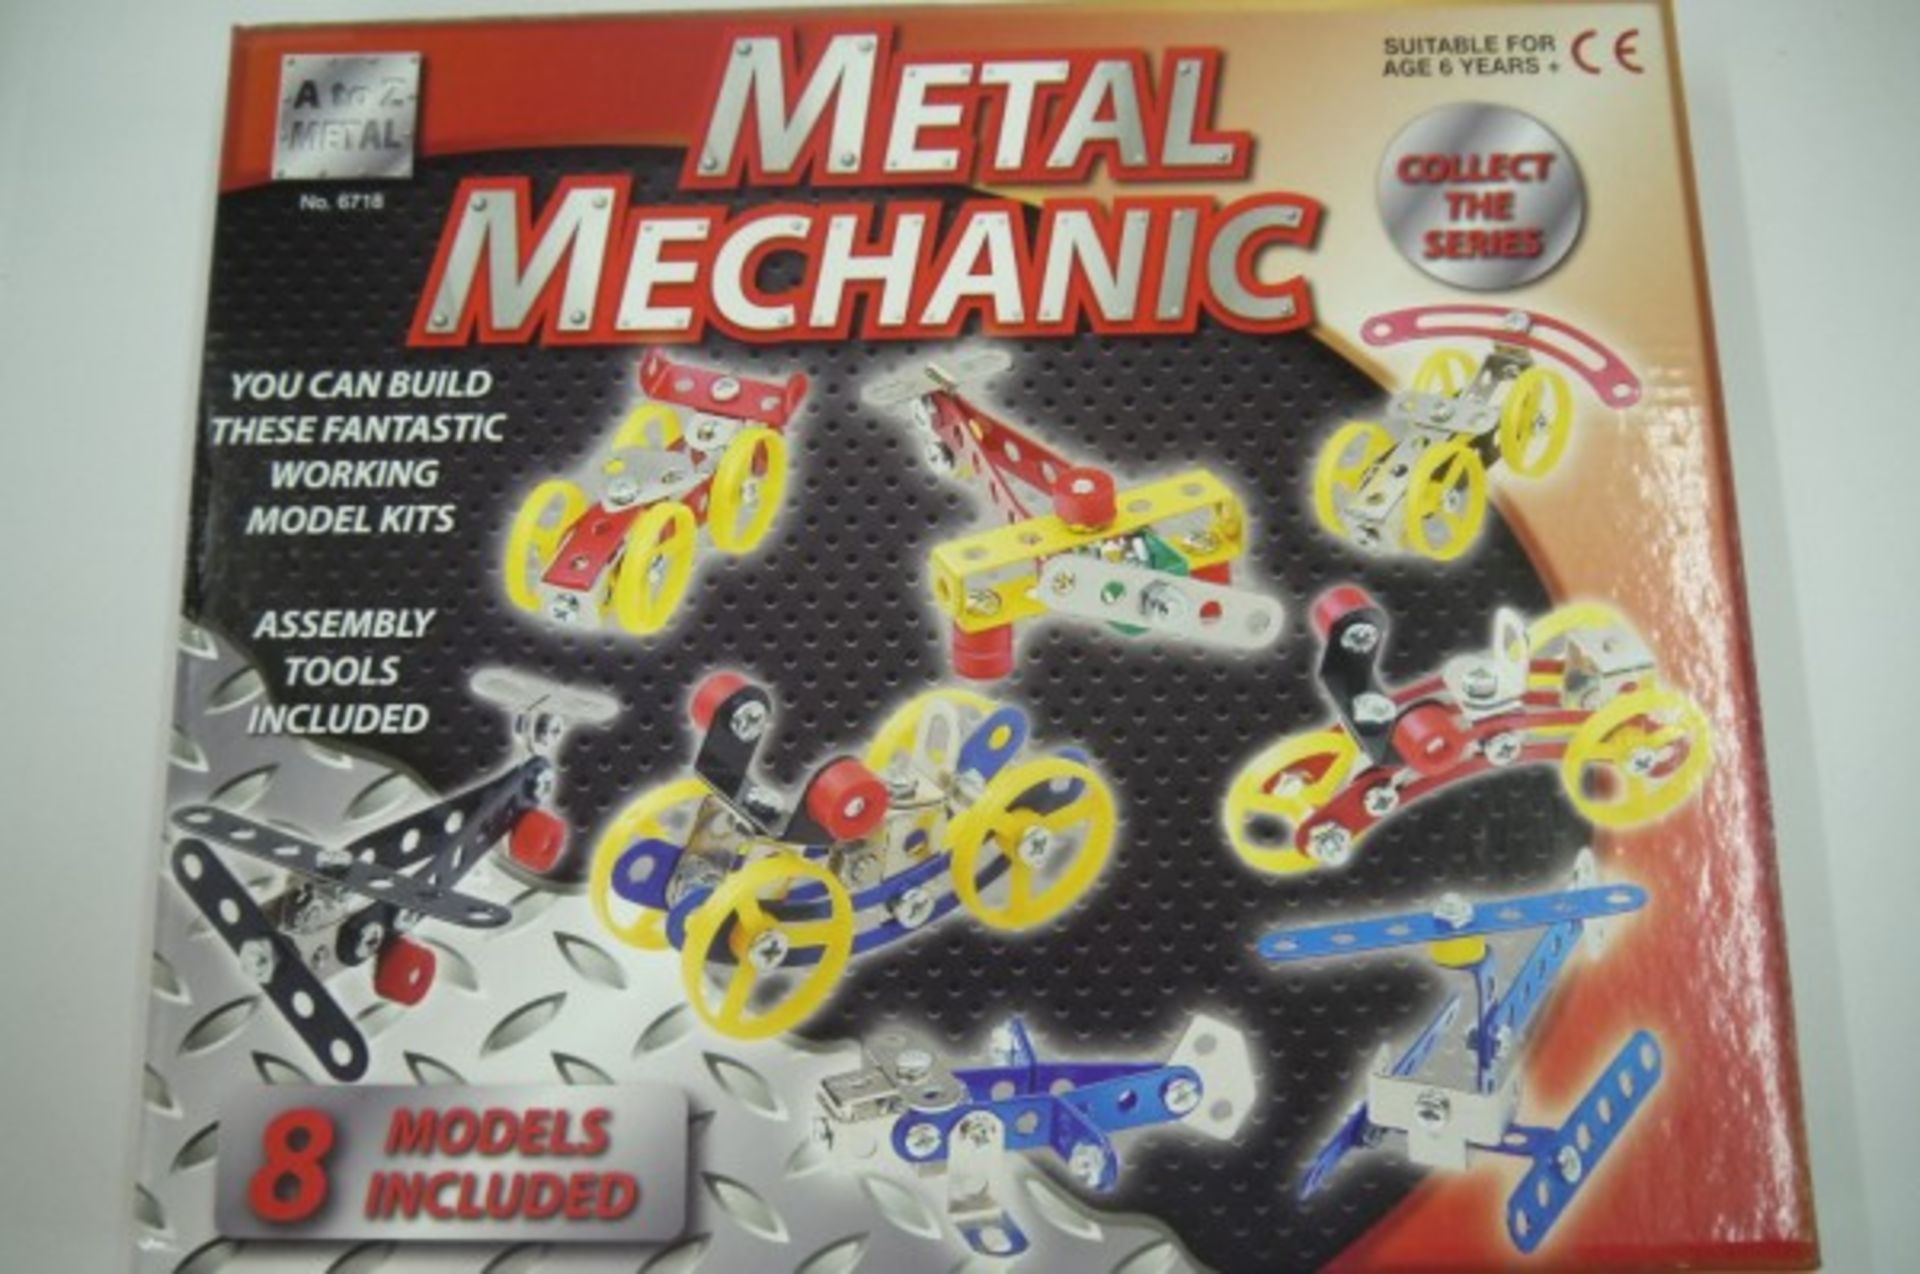 V *TRADE QTY* Brand New Meccano Type Construction Kit Makes 8 Models (Includes Tools) X 5 YOUR BID